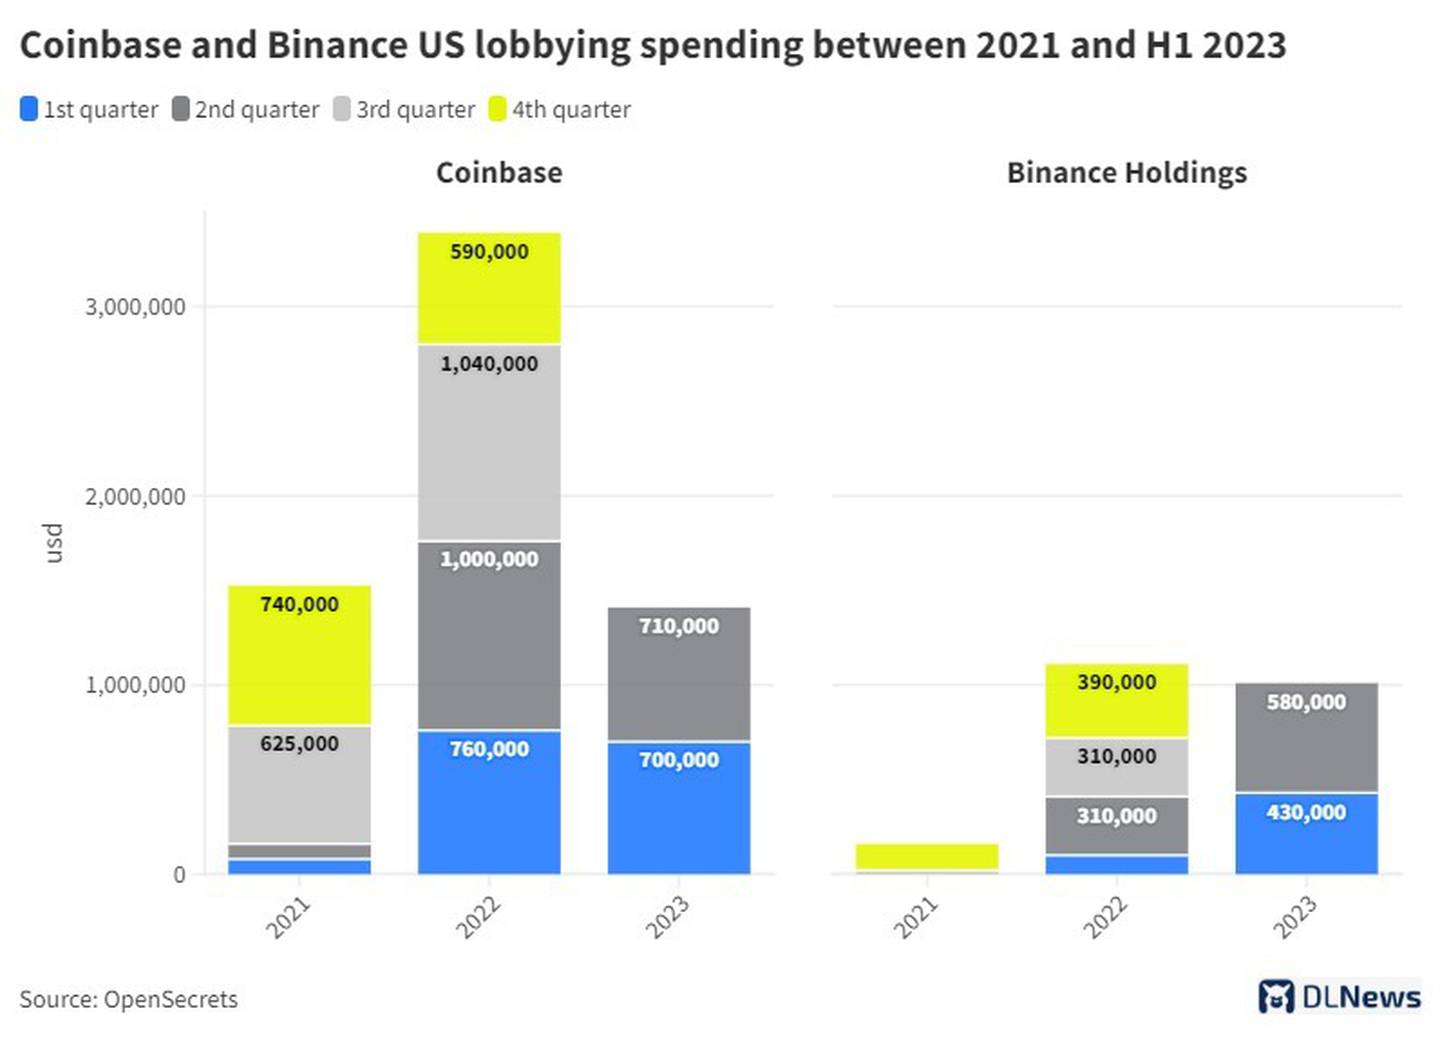 Coinbase and Binance US lobbying spending between 2021 and H1 2023. Credit: Andrés Núñez/DL News.